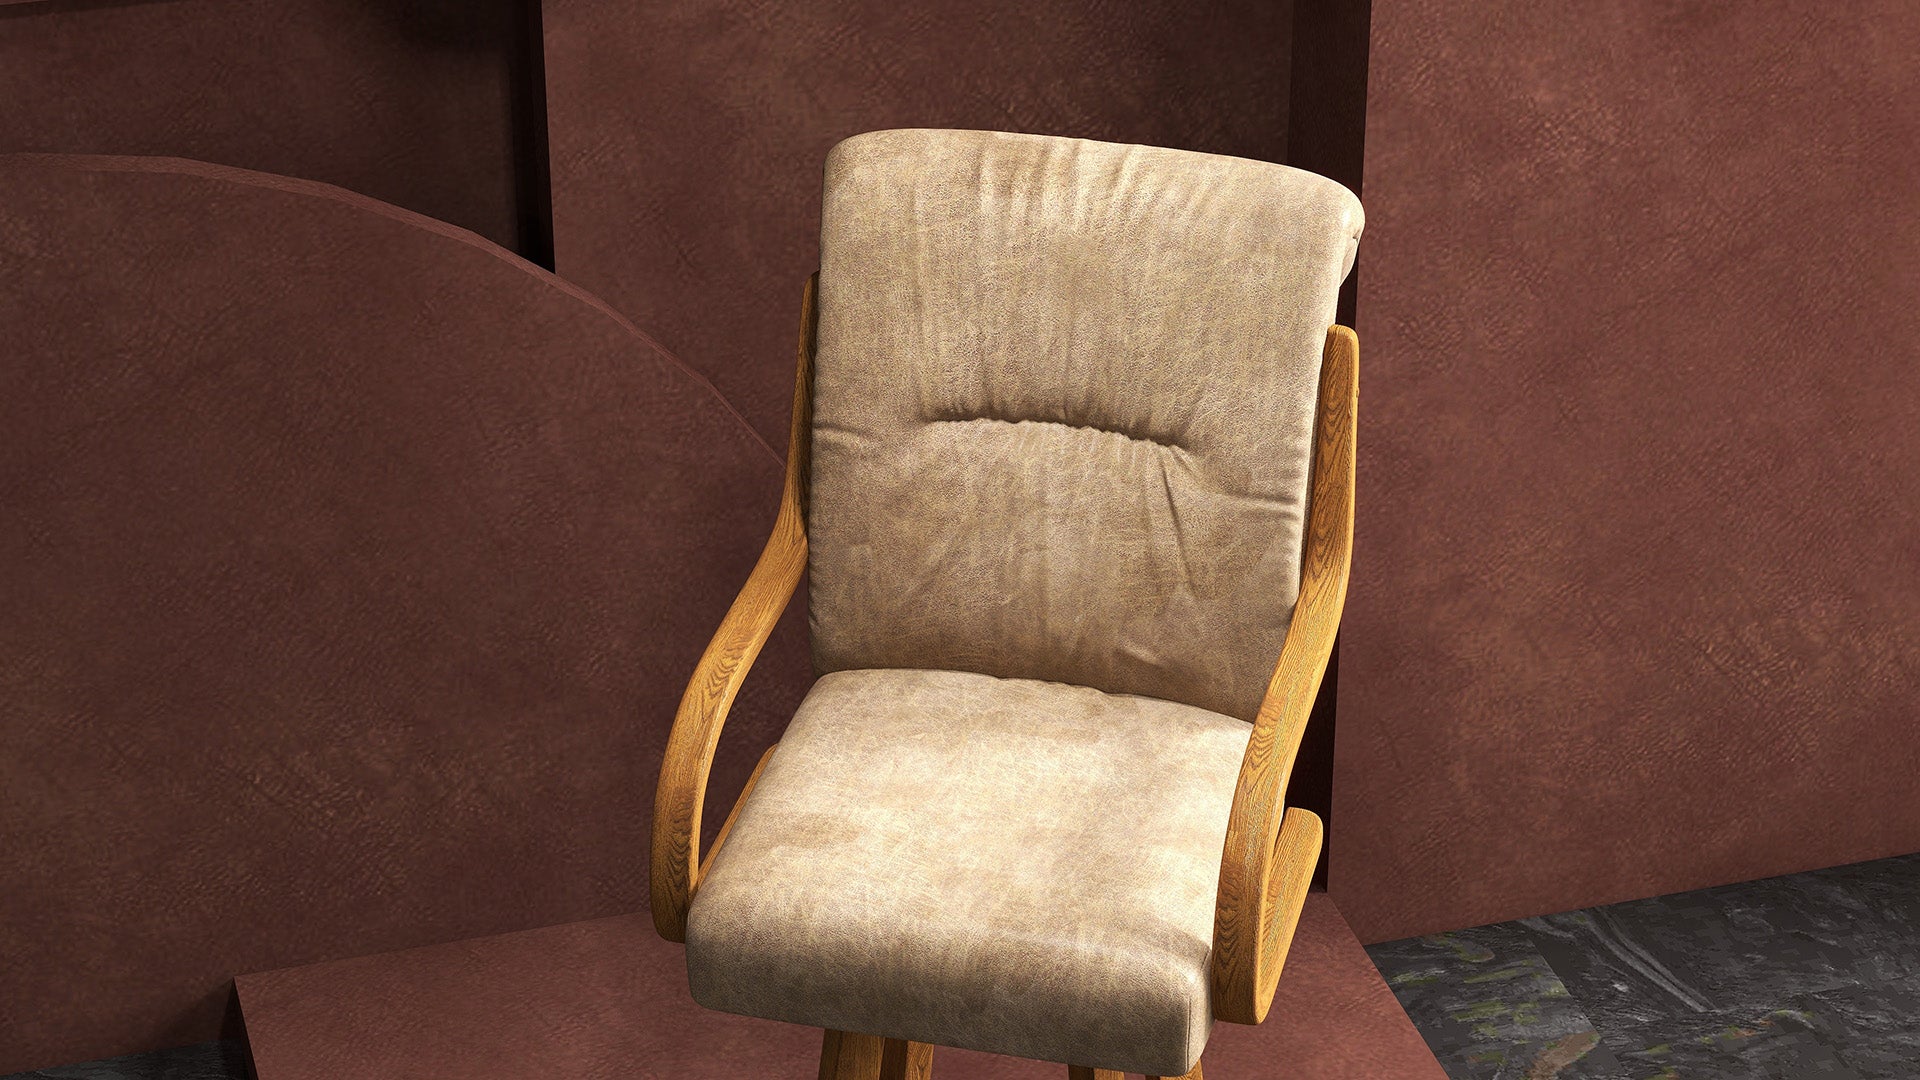 Denton Collection CM179-CDS388 Counter Chair: Modern Style Meets Royal Comfort